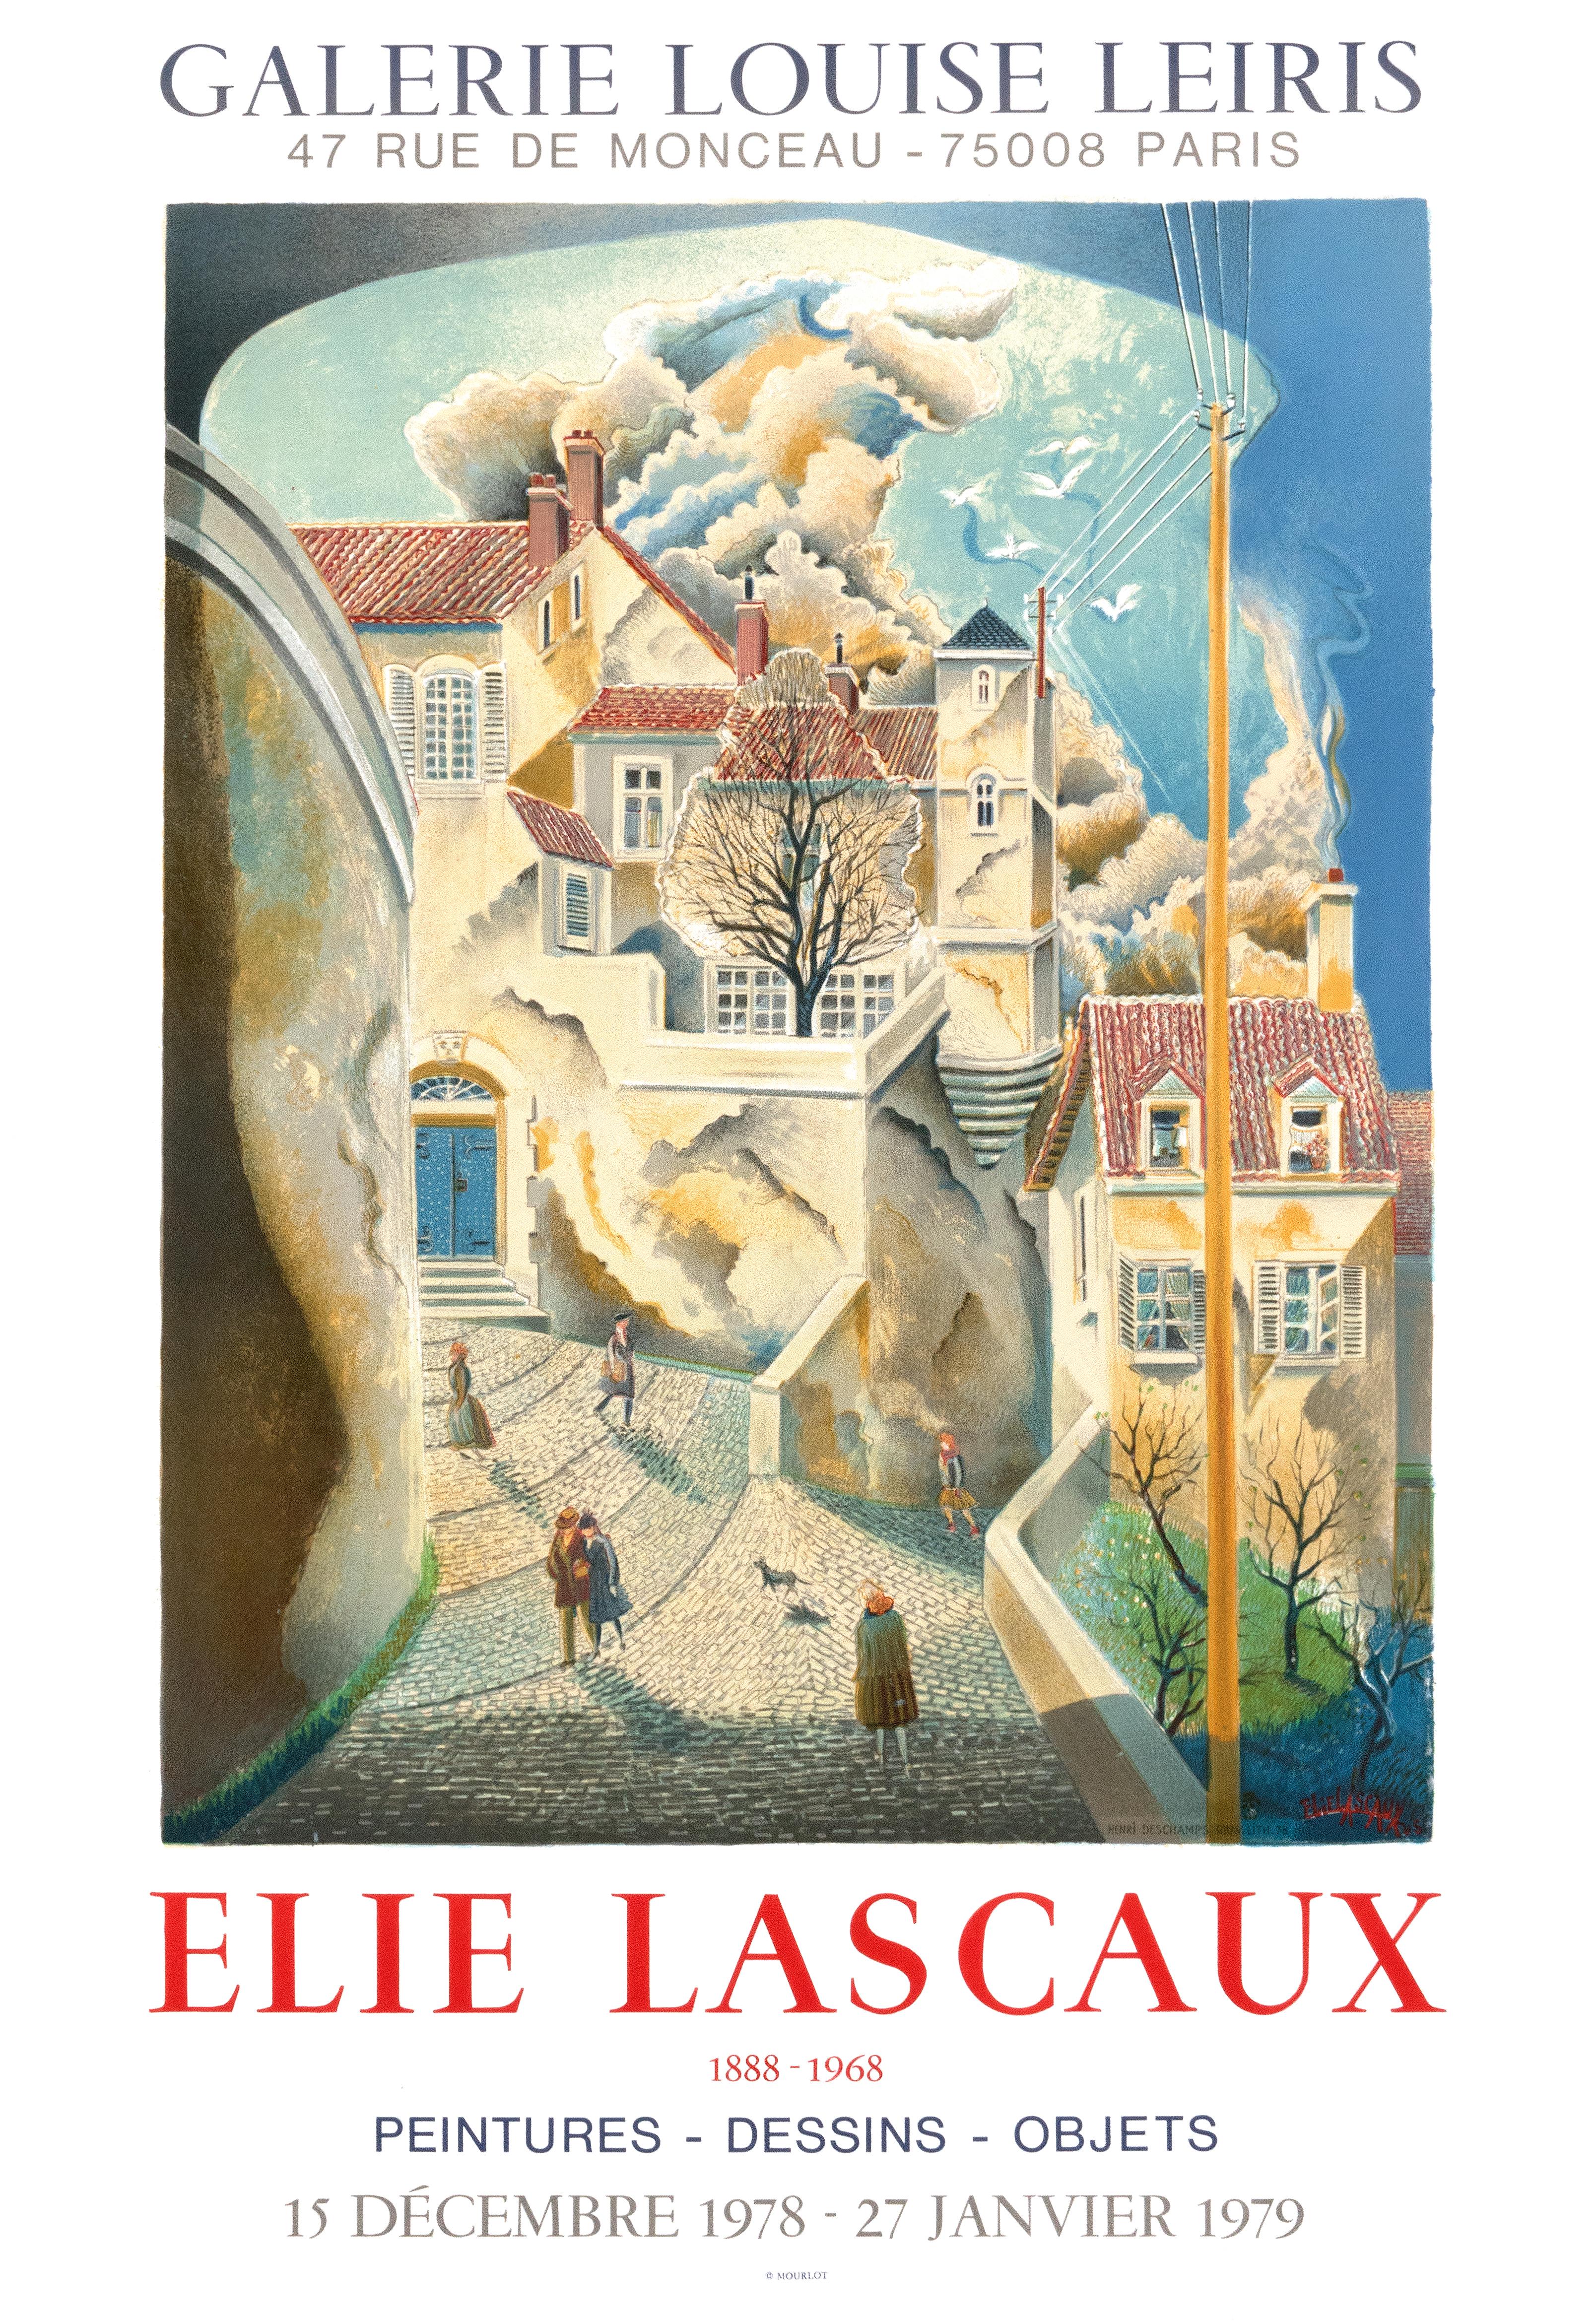 A beautiful exhibition poster for painter Elie Lascaux (1888-1968) at Galerie Louise Leiris, featuring a detailed and colorful village scene.  

In excellent condition. This is a vintage lithographic poster and is guaranteed to be an original. It is